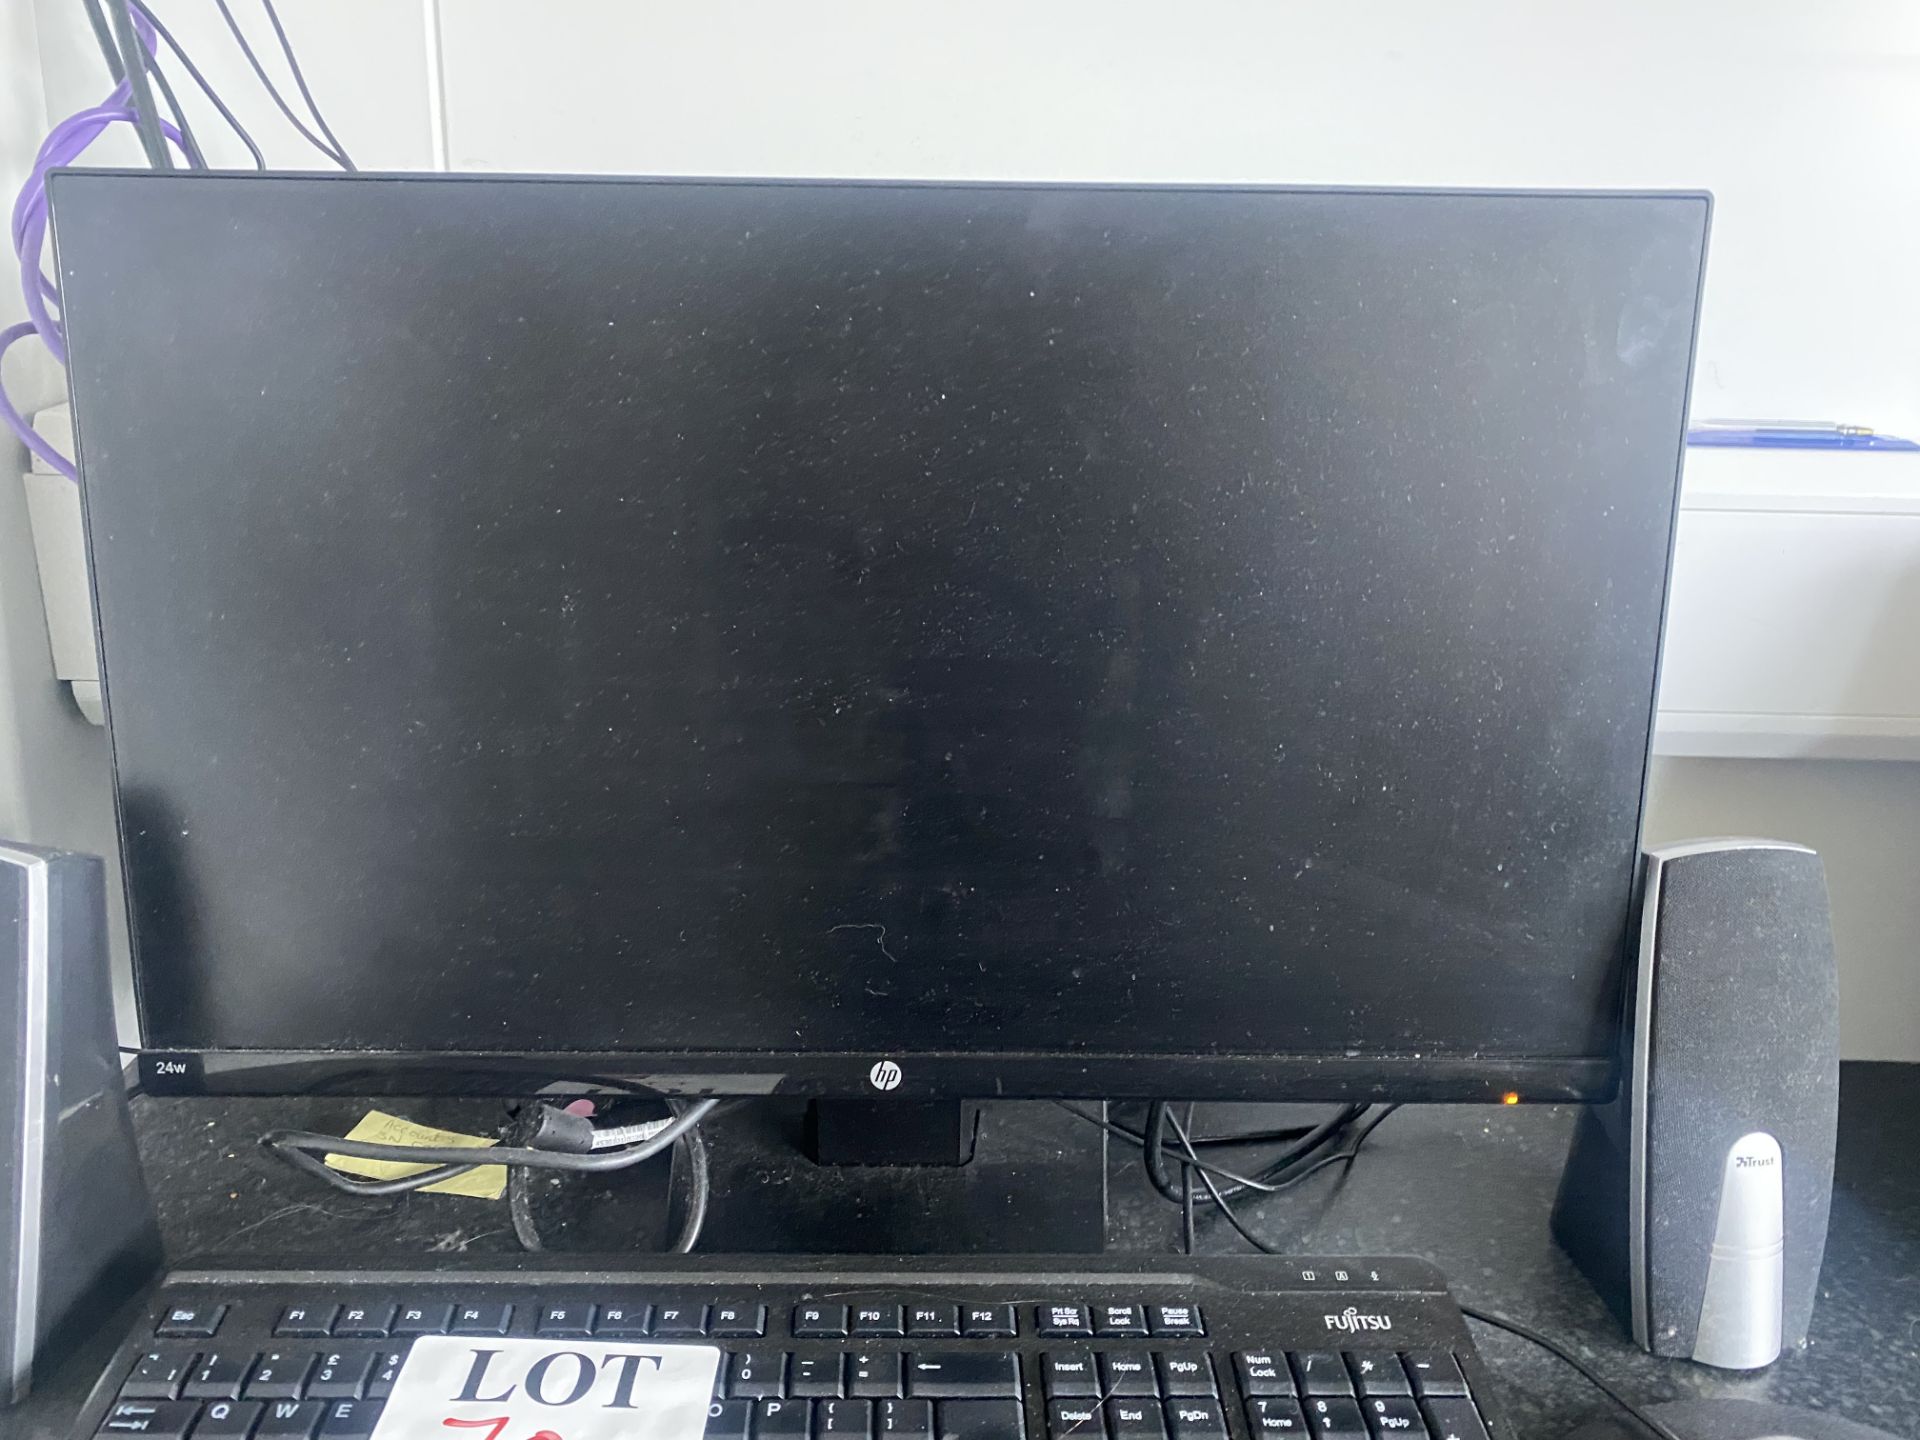 HP 24w 2020 monitor with Fujitsu Esprimo PC, 2 Trust speakers, keyboard and mouse - Image 5 of 7